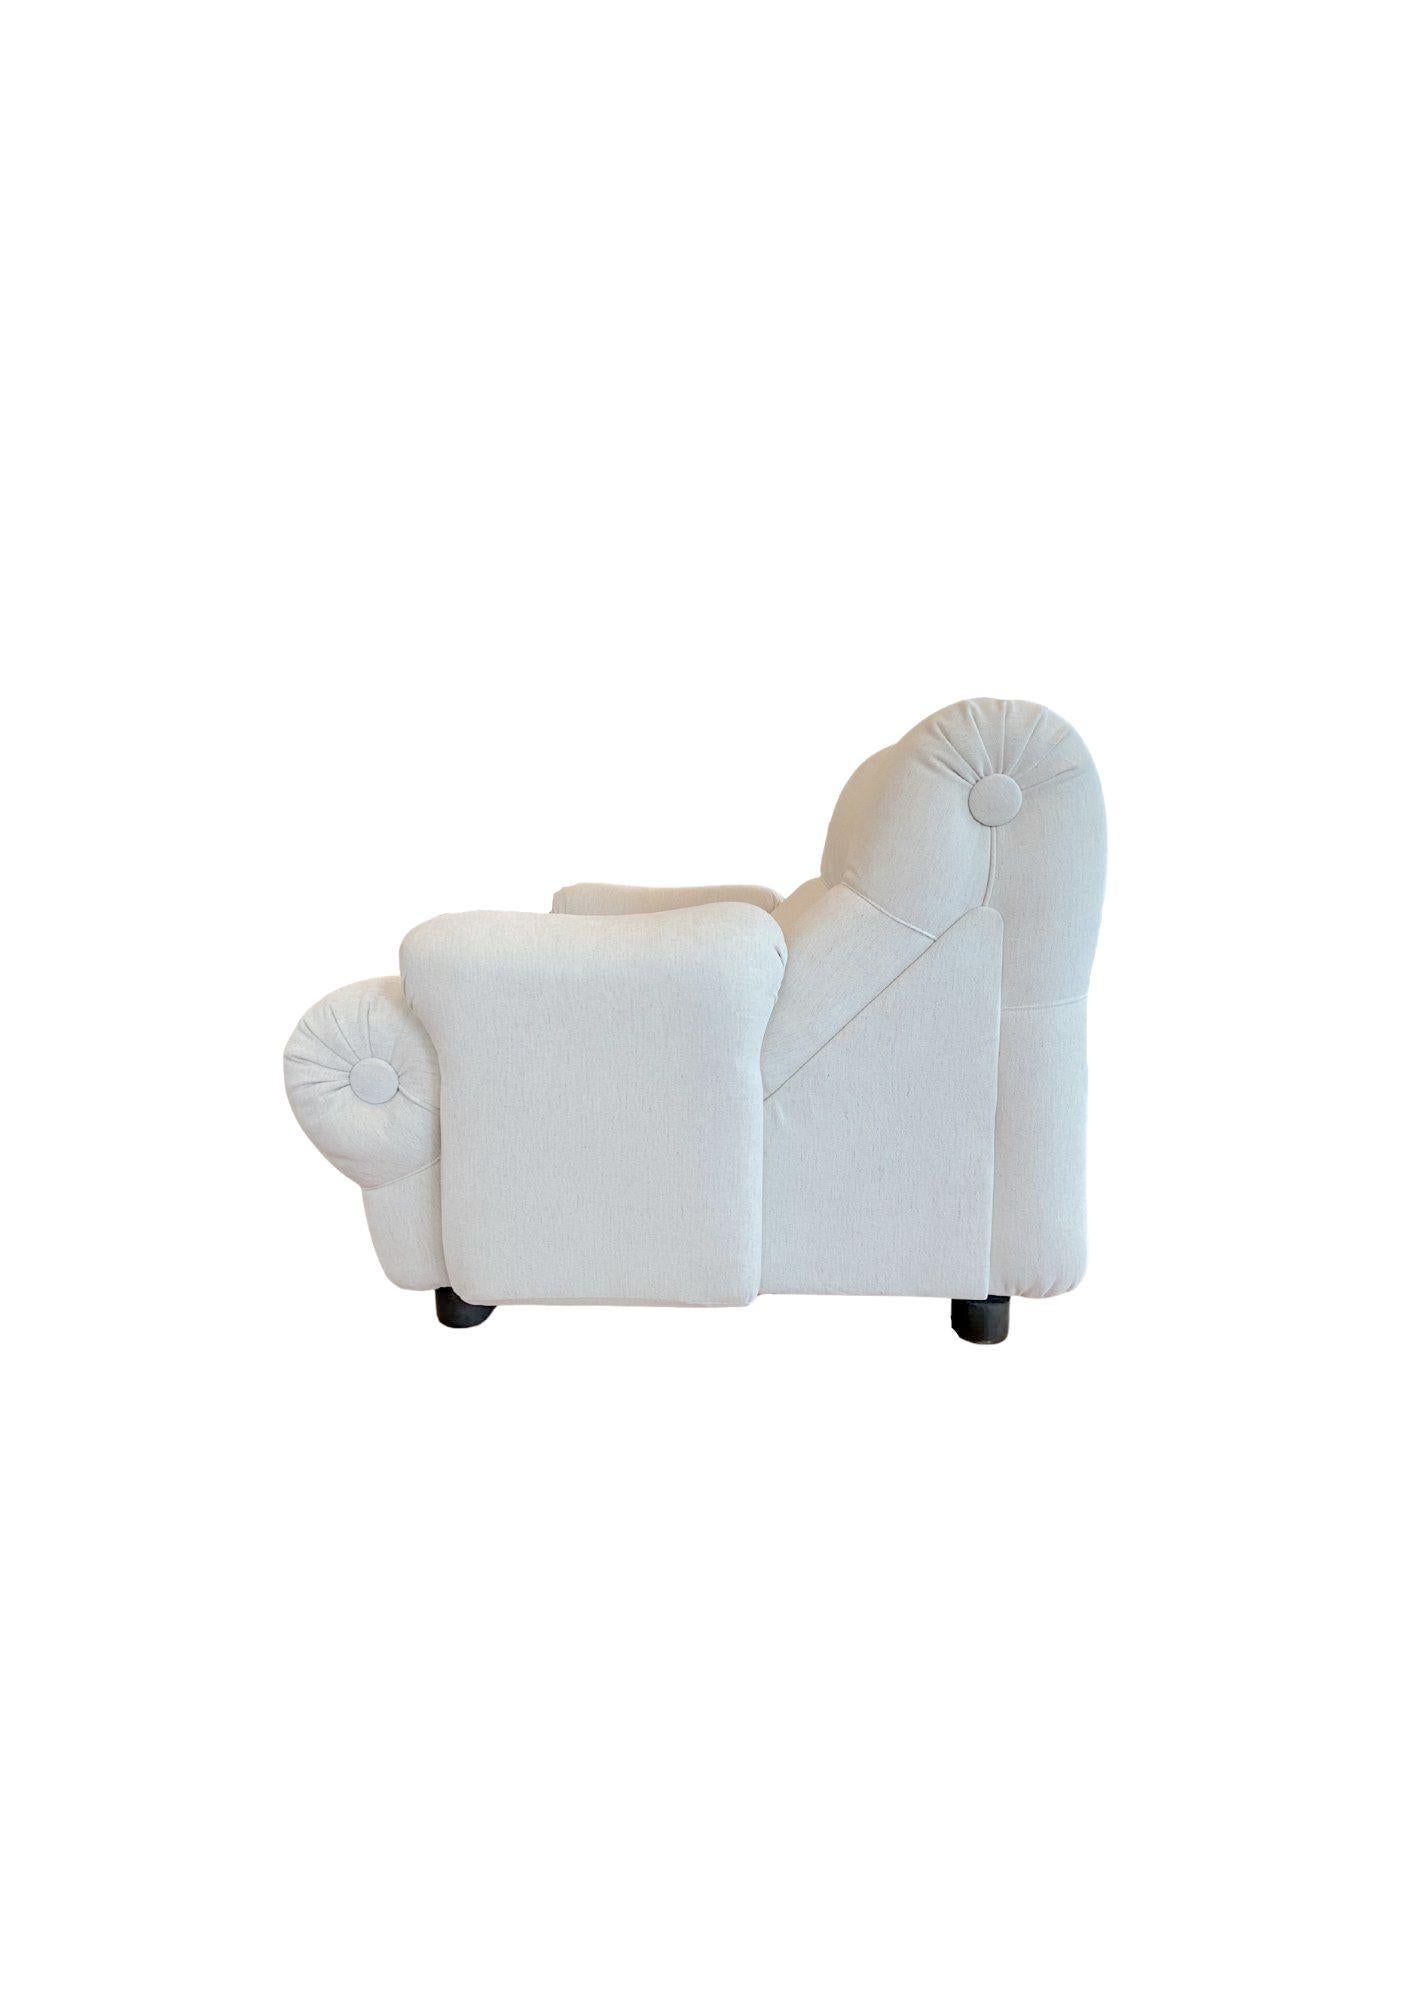 Modern White Lounge Chairs by Emilio Guarnacci and Felix Padovano Pair For Sale